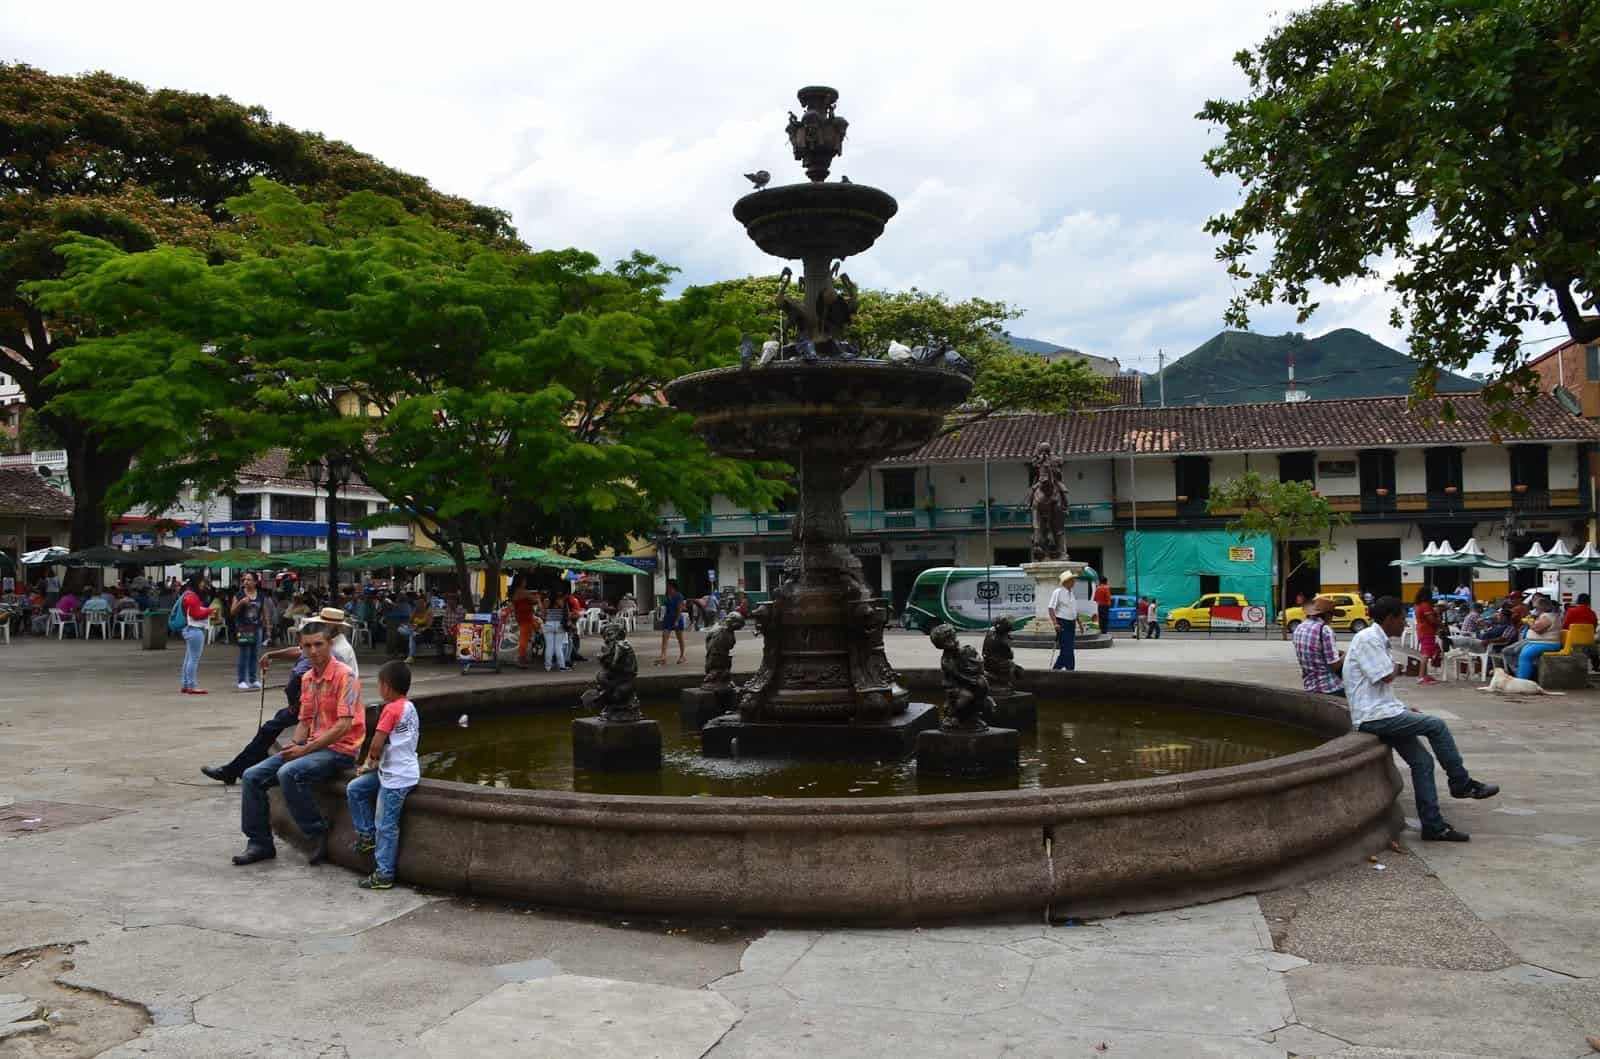 Fountain in the plaza in Andes, Antioquia, Colombia